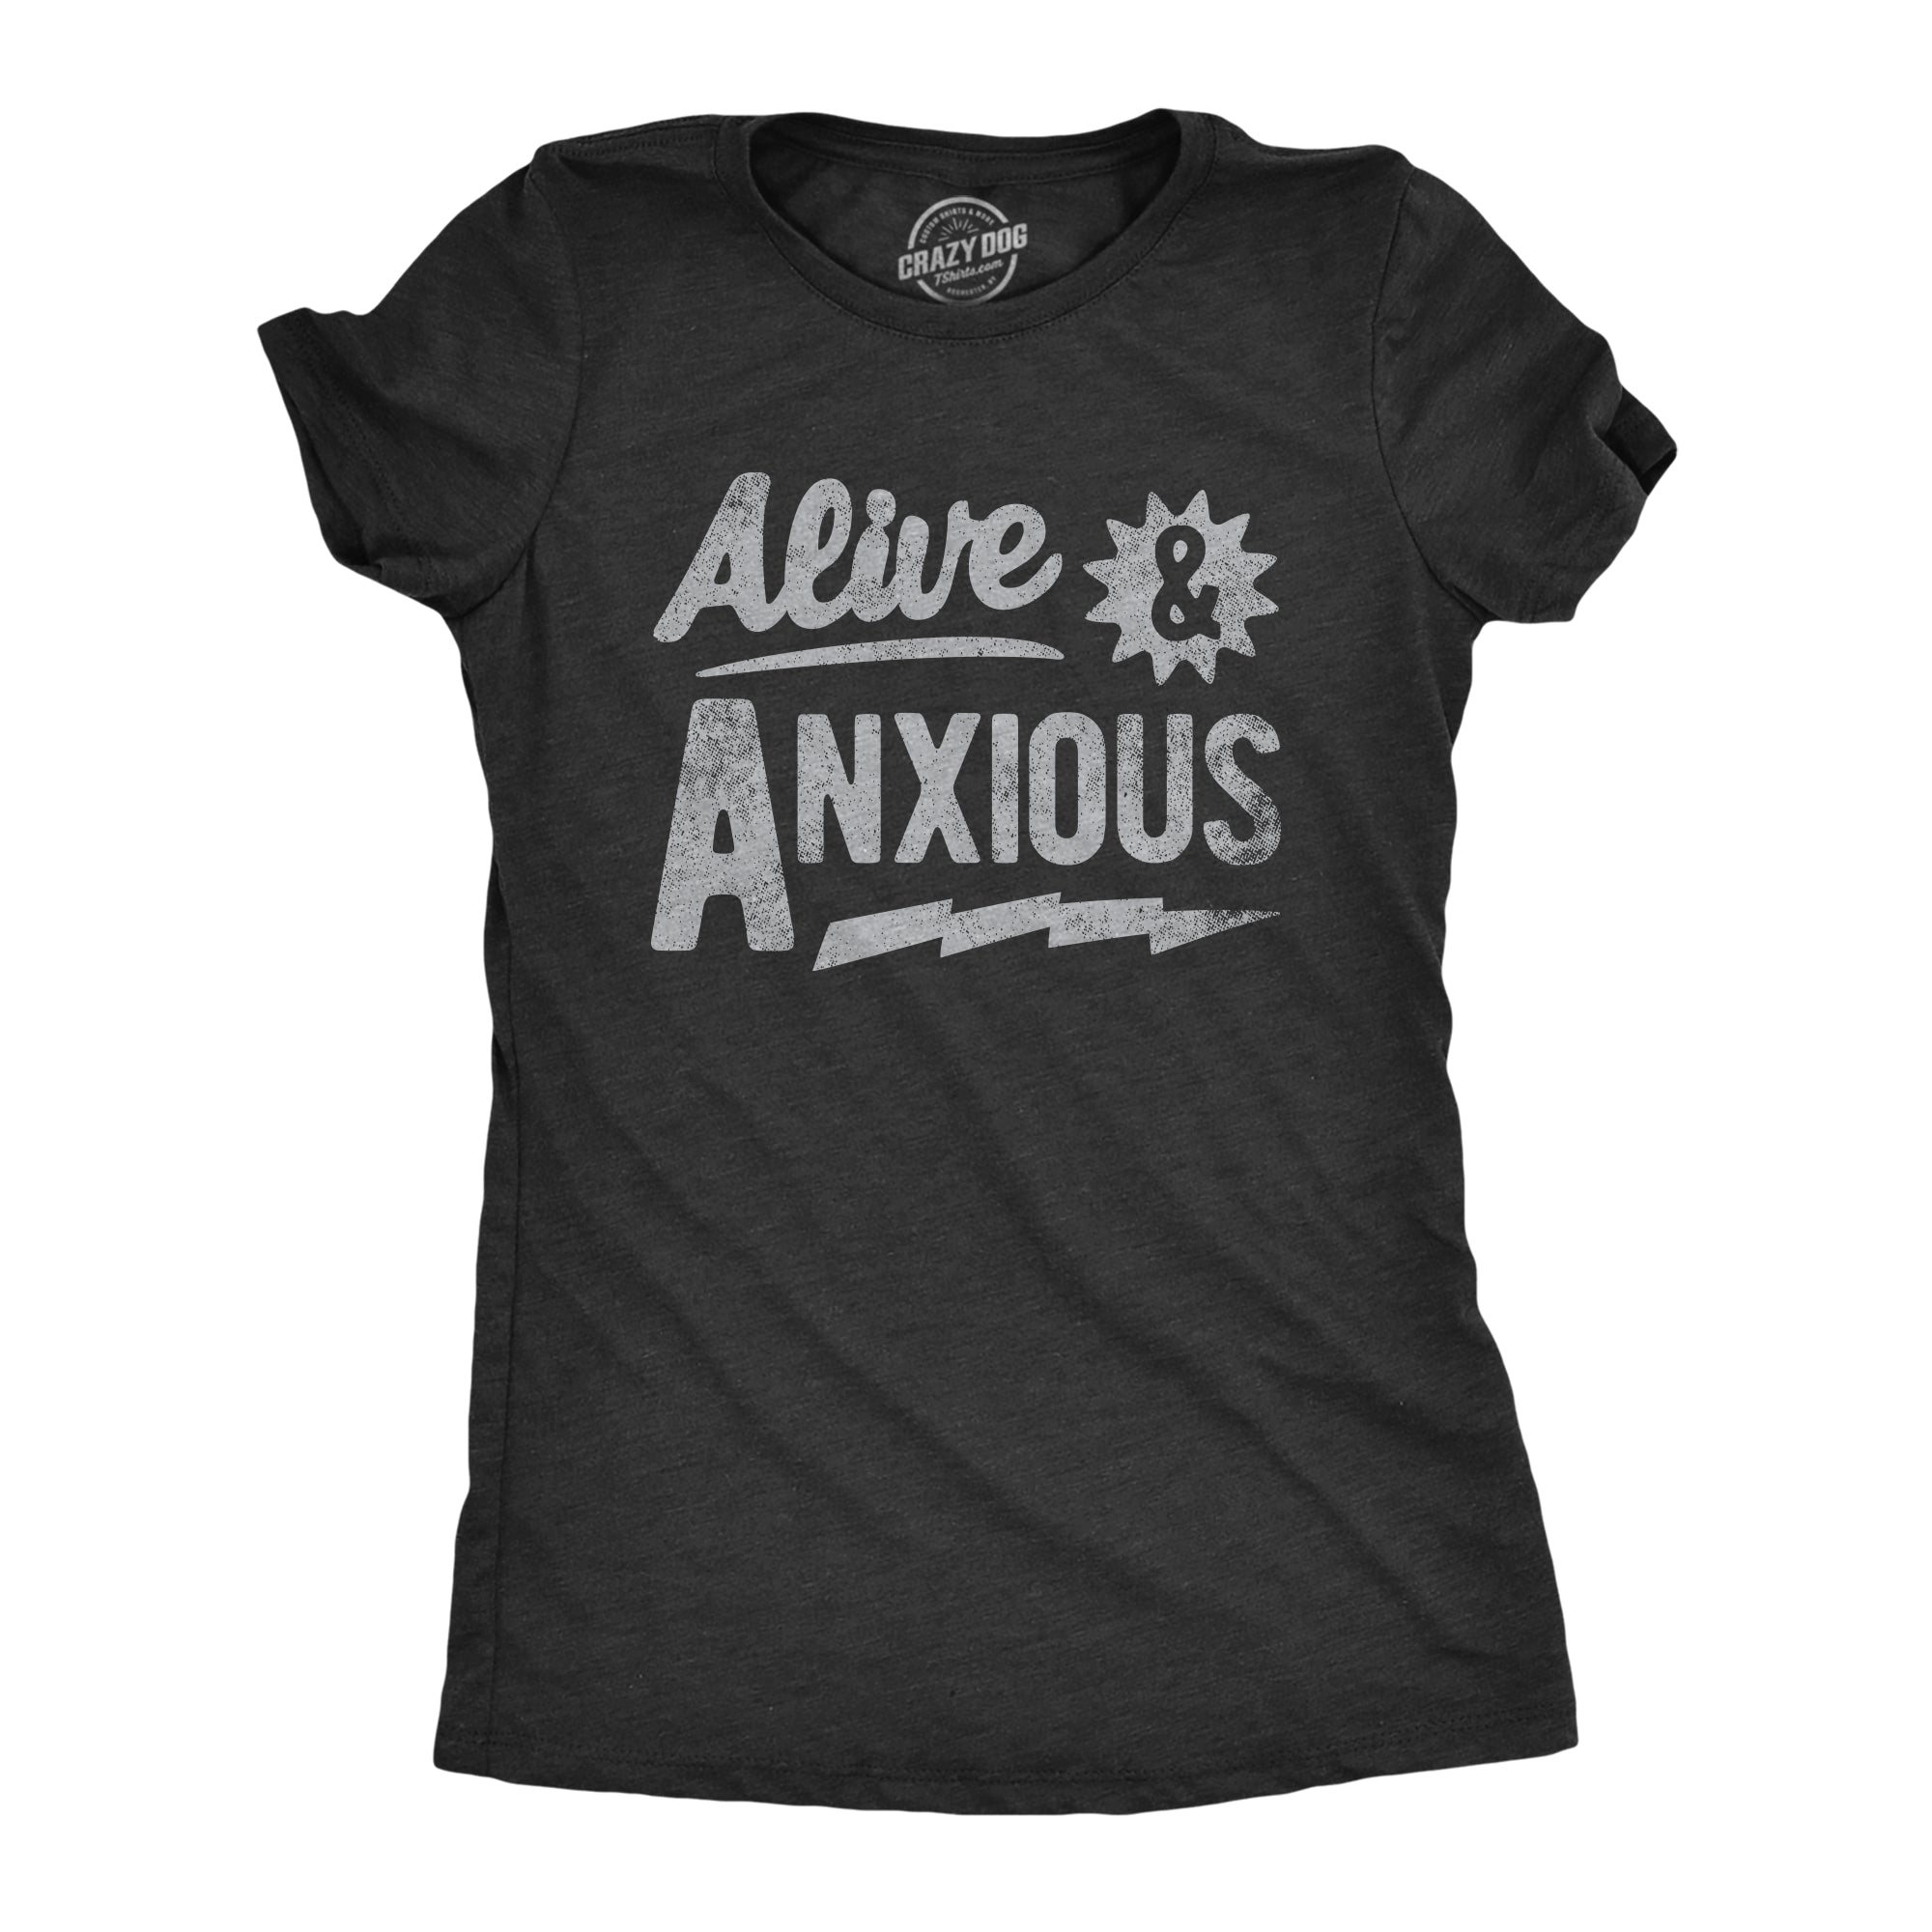 Funny Heather Black - ANXIOUS Alive And Anxious Womens T Shirt Nerdy sarcastic Tee